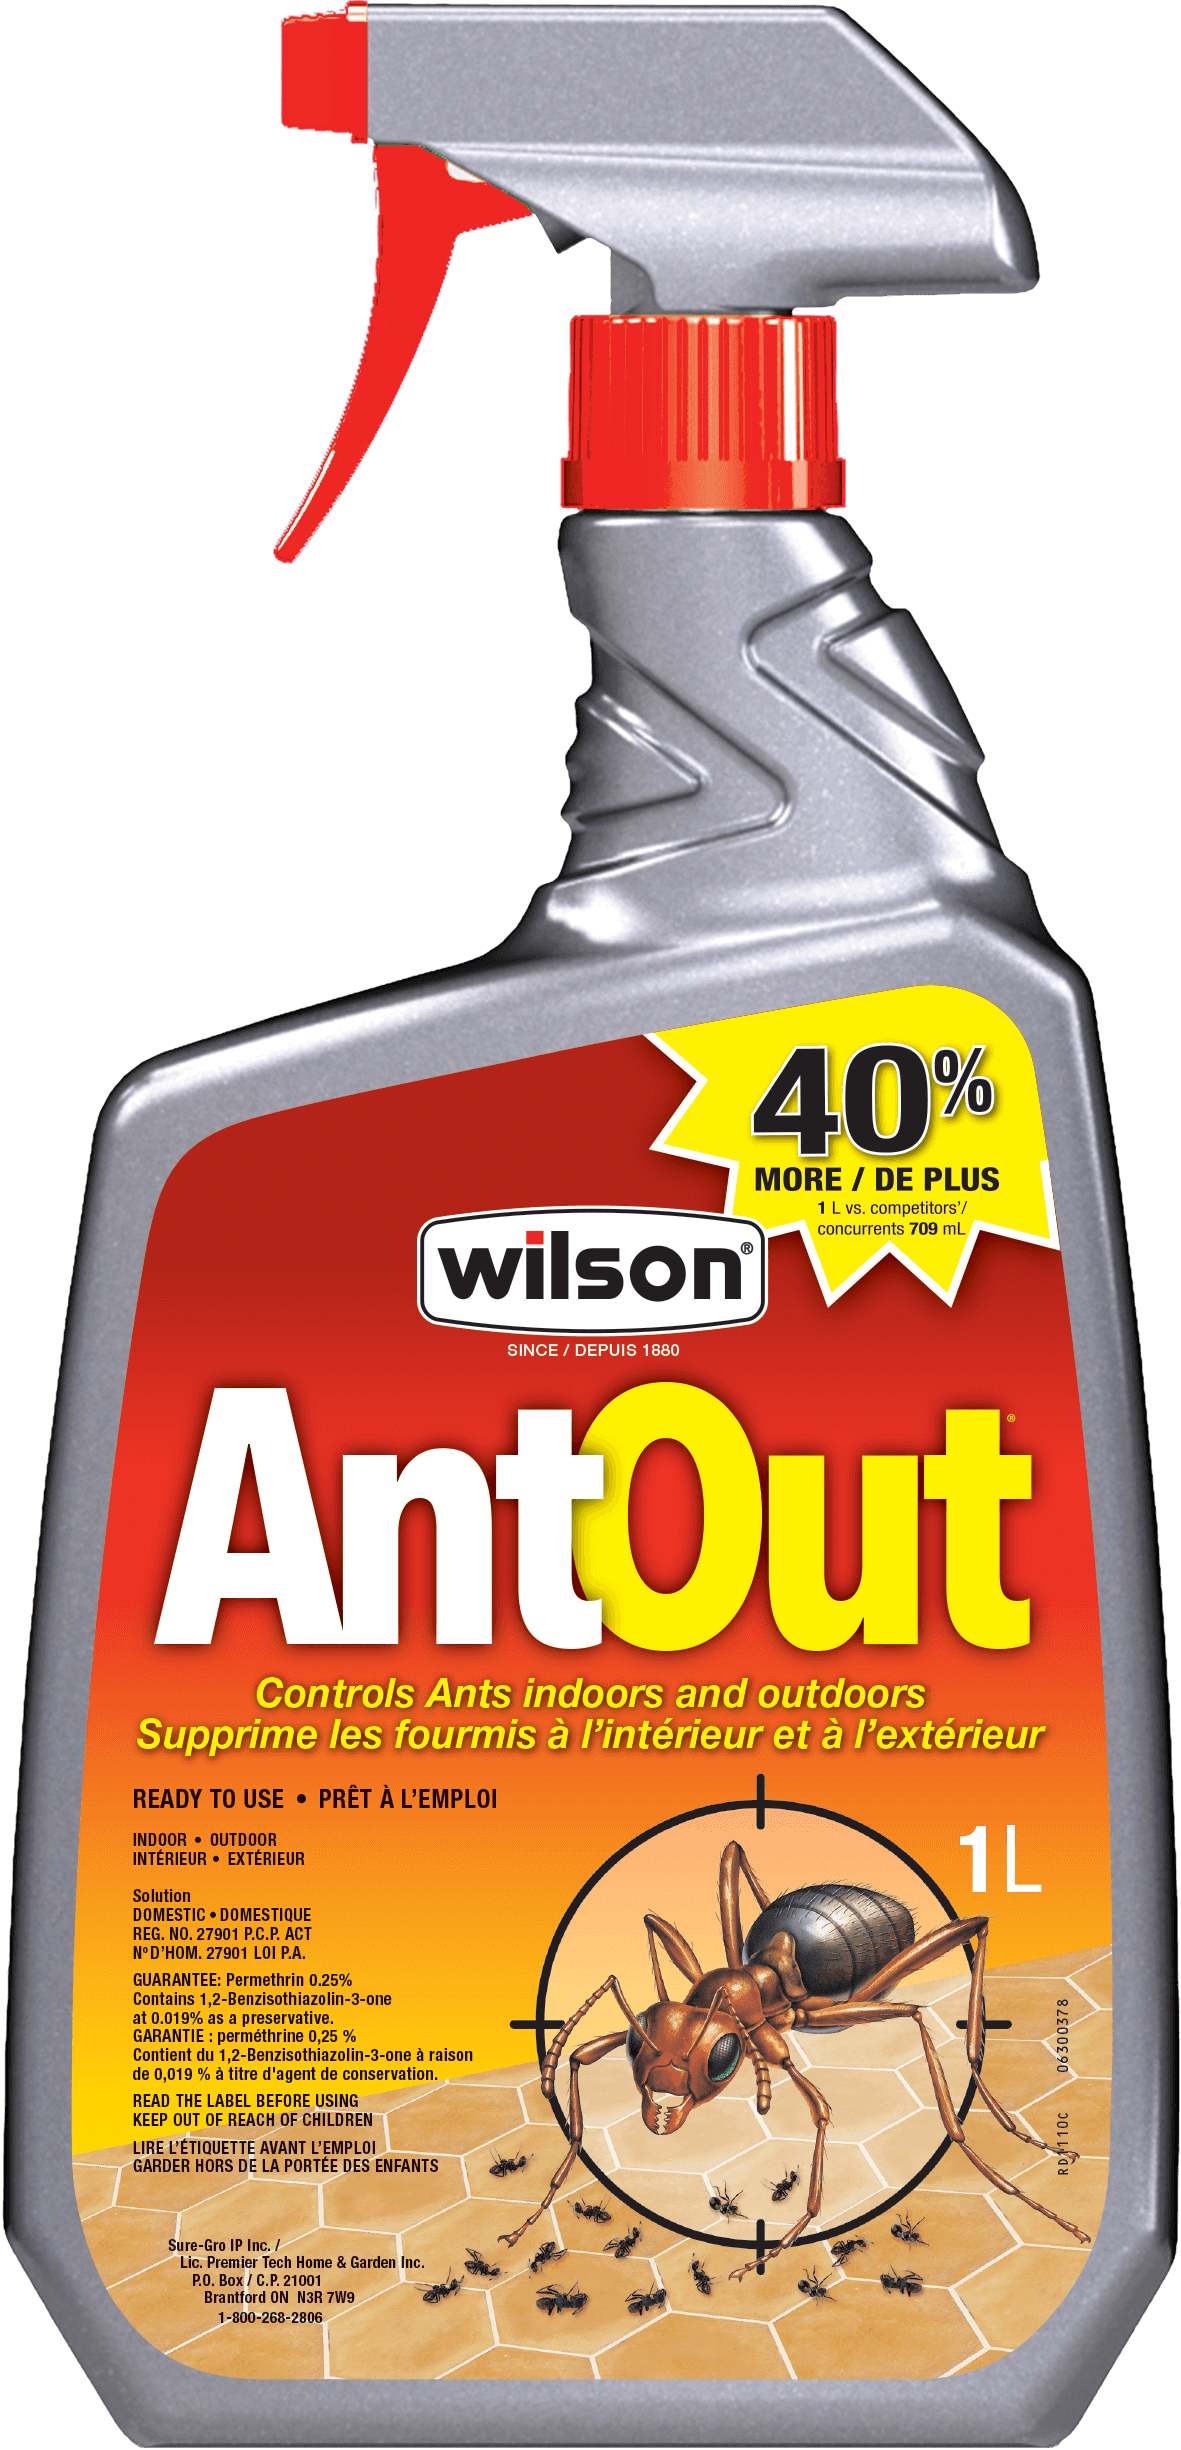 Wilson Ant Out 1L Ready To Use